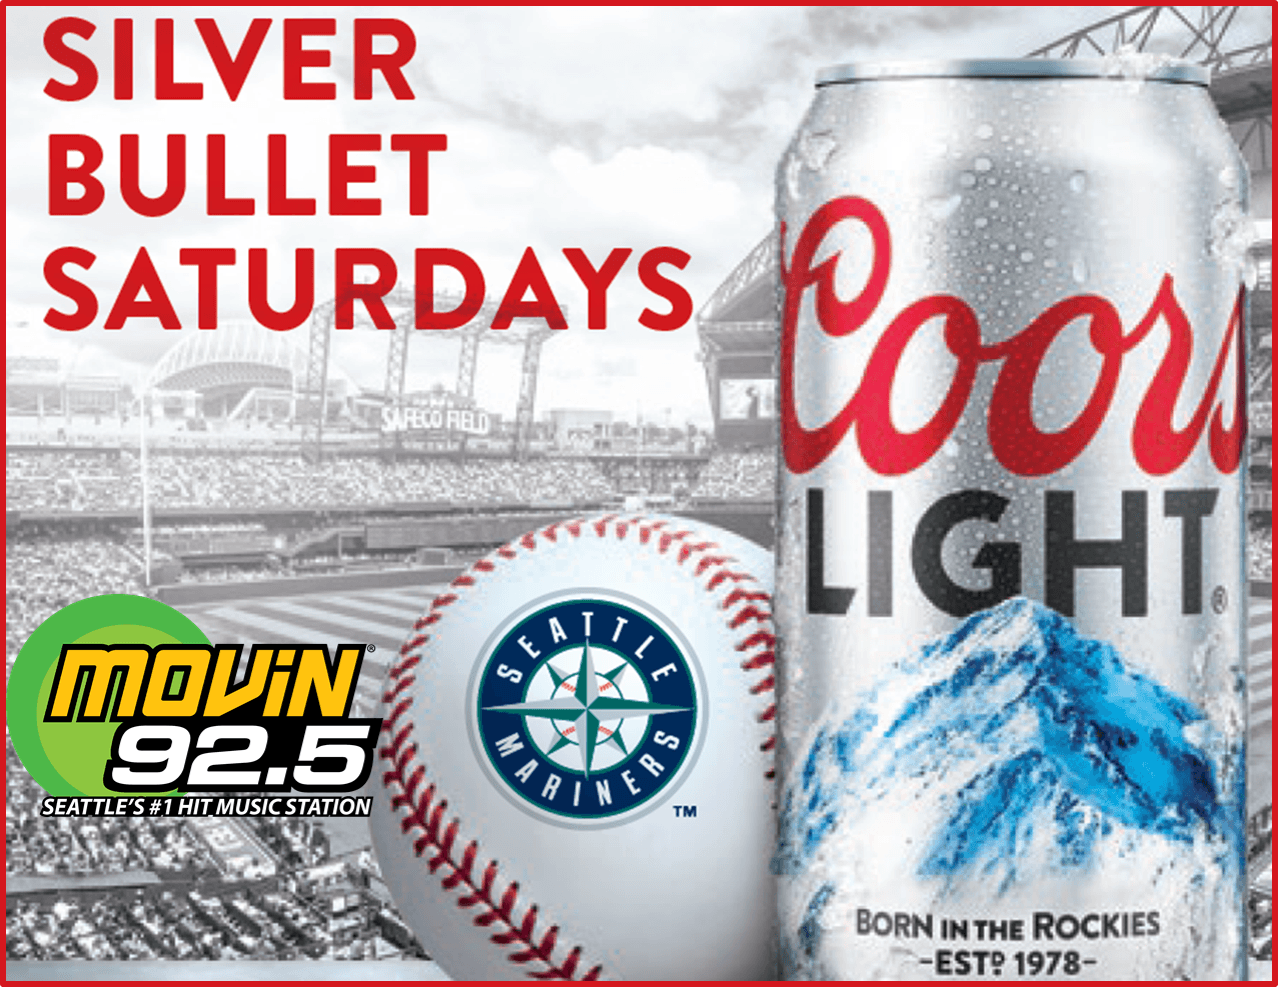 Silver Bullet Coors Light Logo - Silver Bullet Saturdays - MOViN 92.5 - Seattle's #1 Hit Music Station